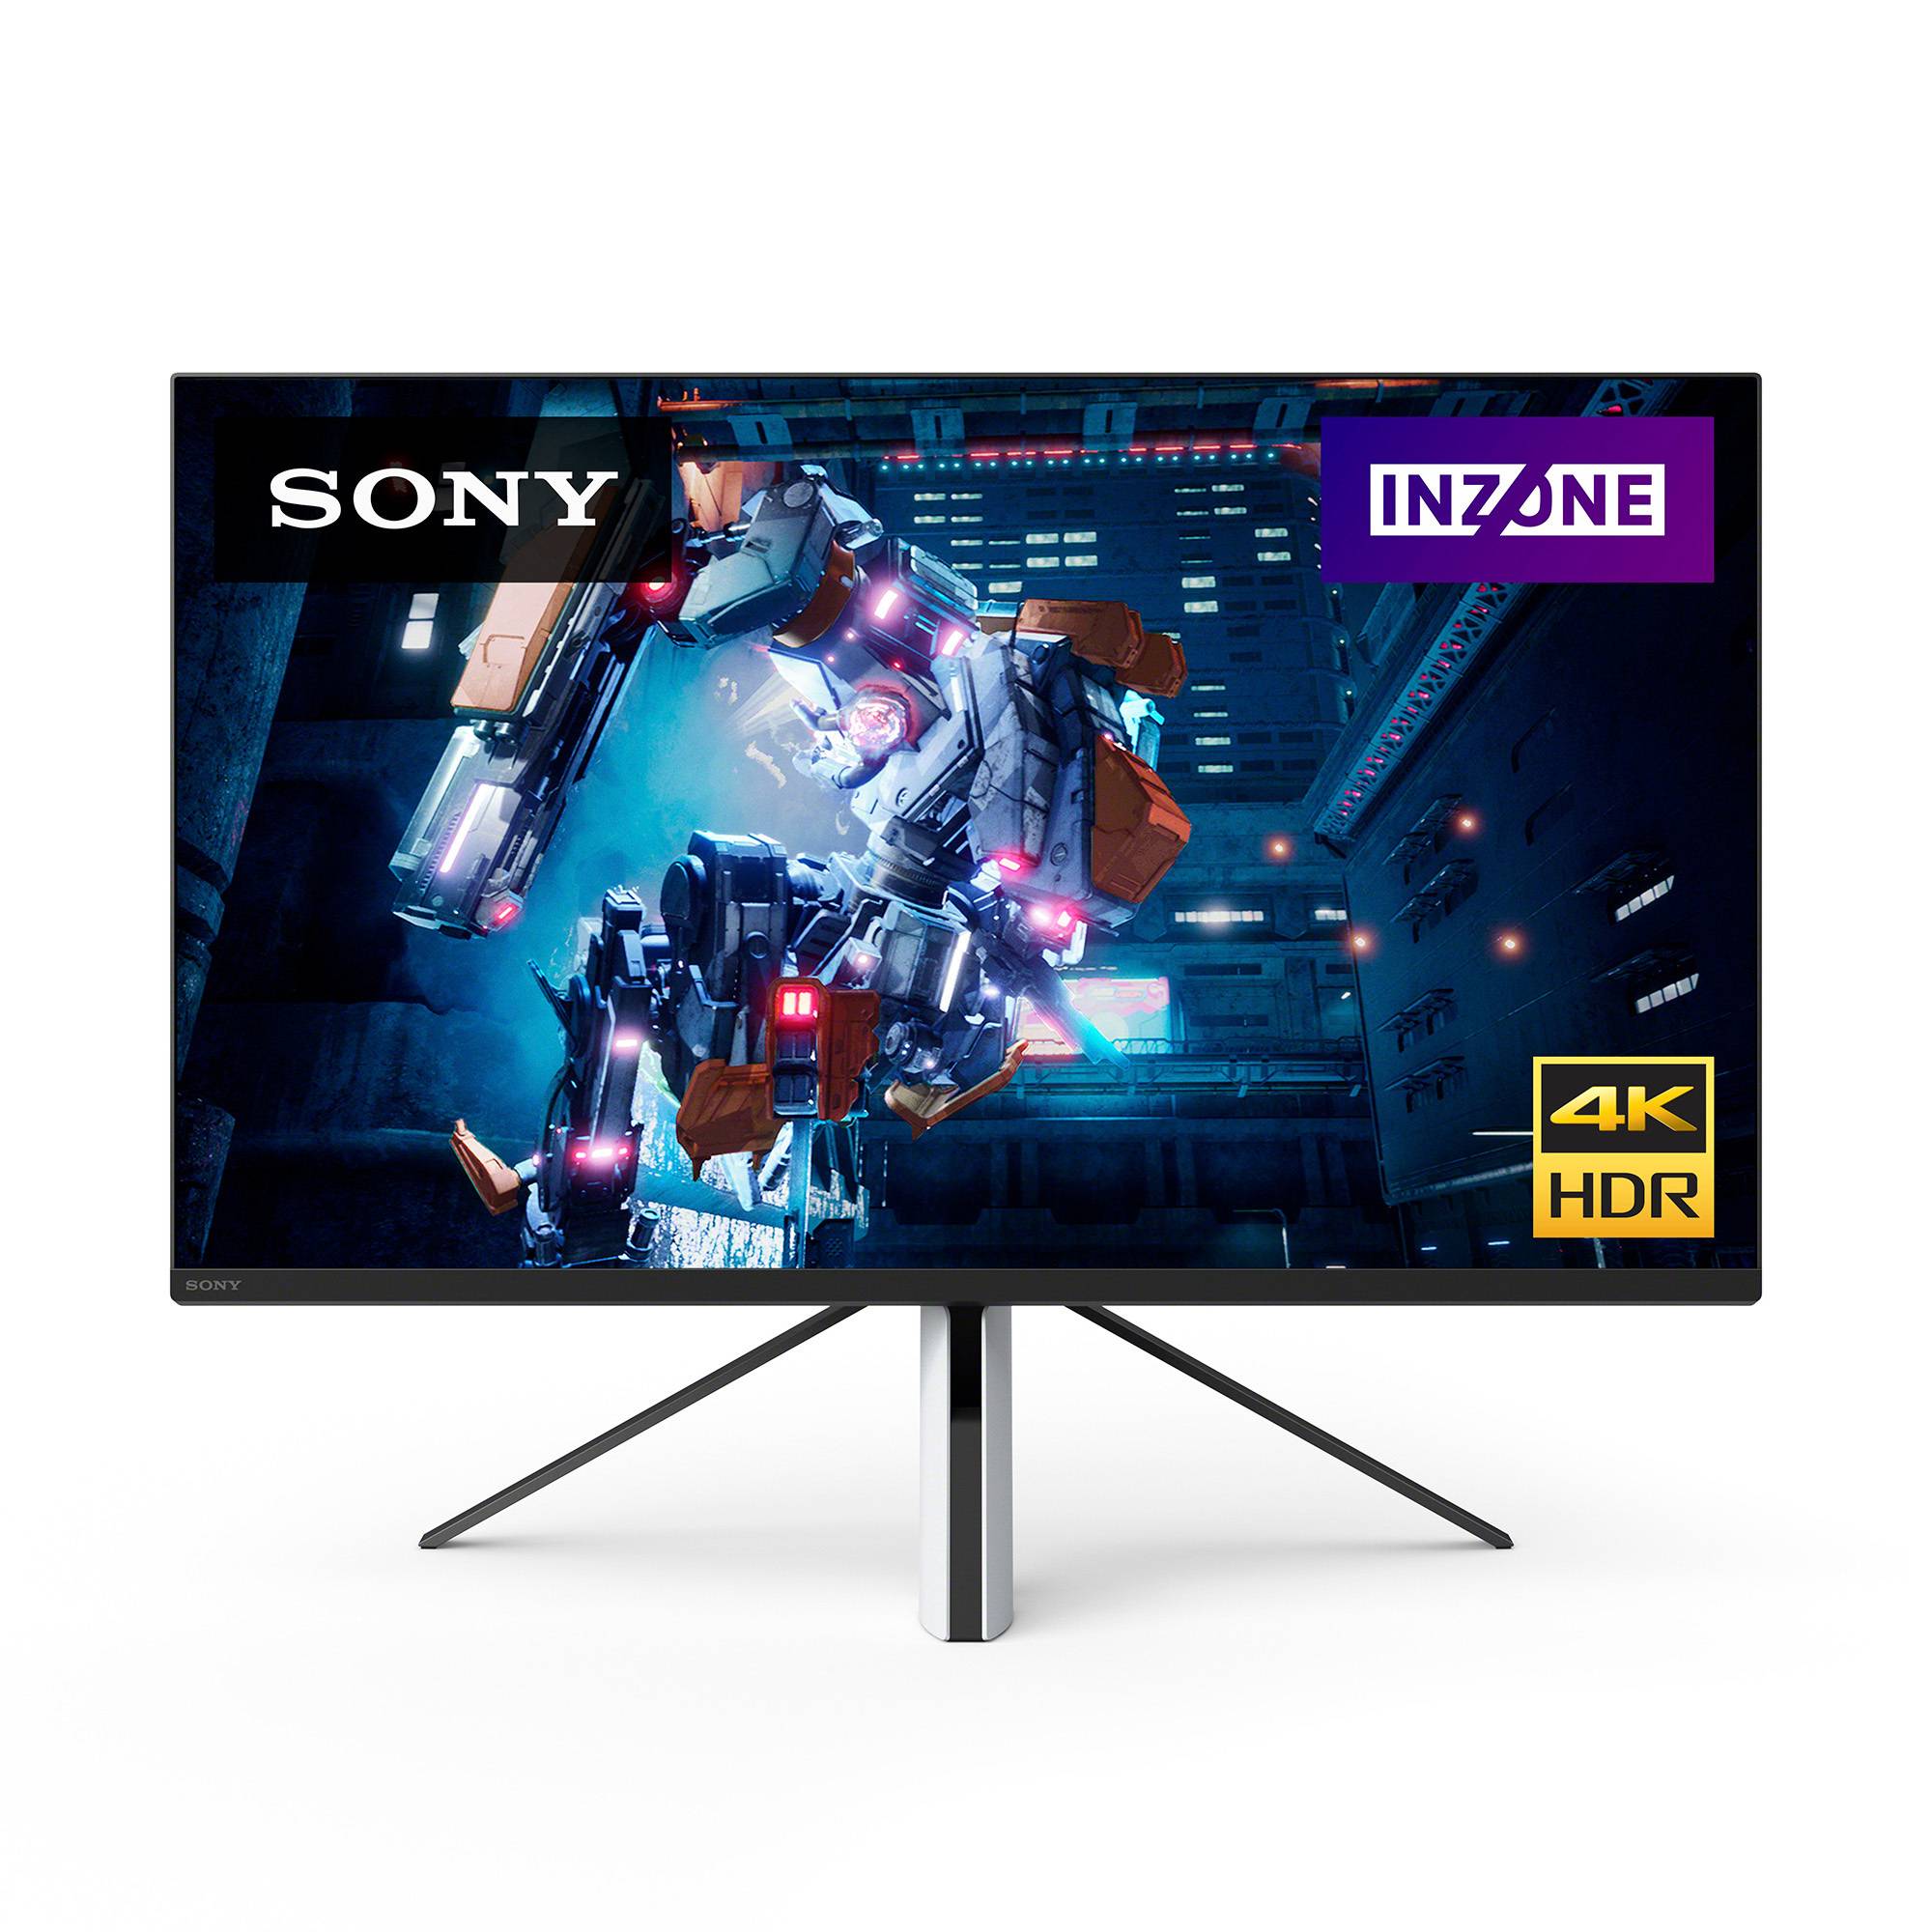 Sony 27” INZONE M9 4K HDR 144Hz Gaming Monitor with Full Array Local Dimming (SDM-U27M90)